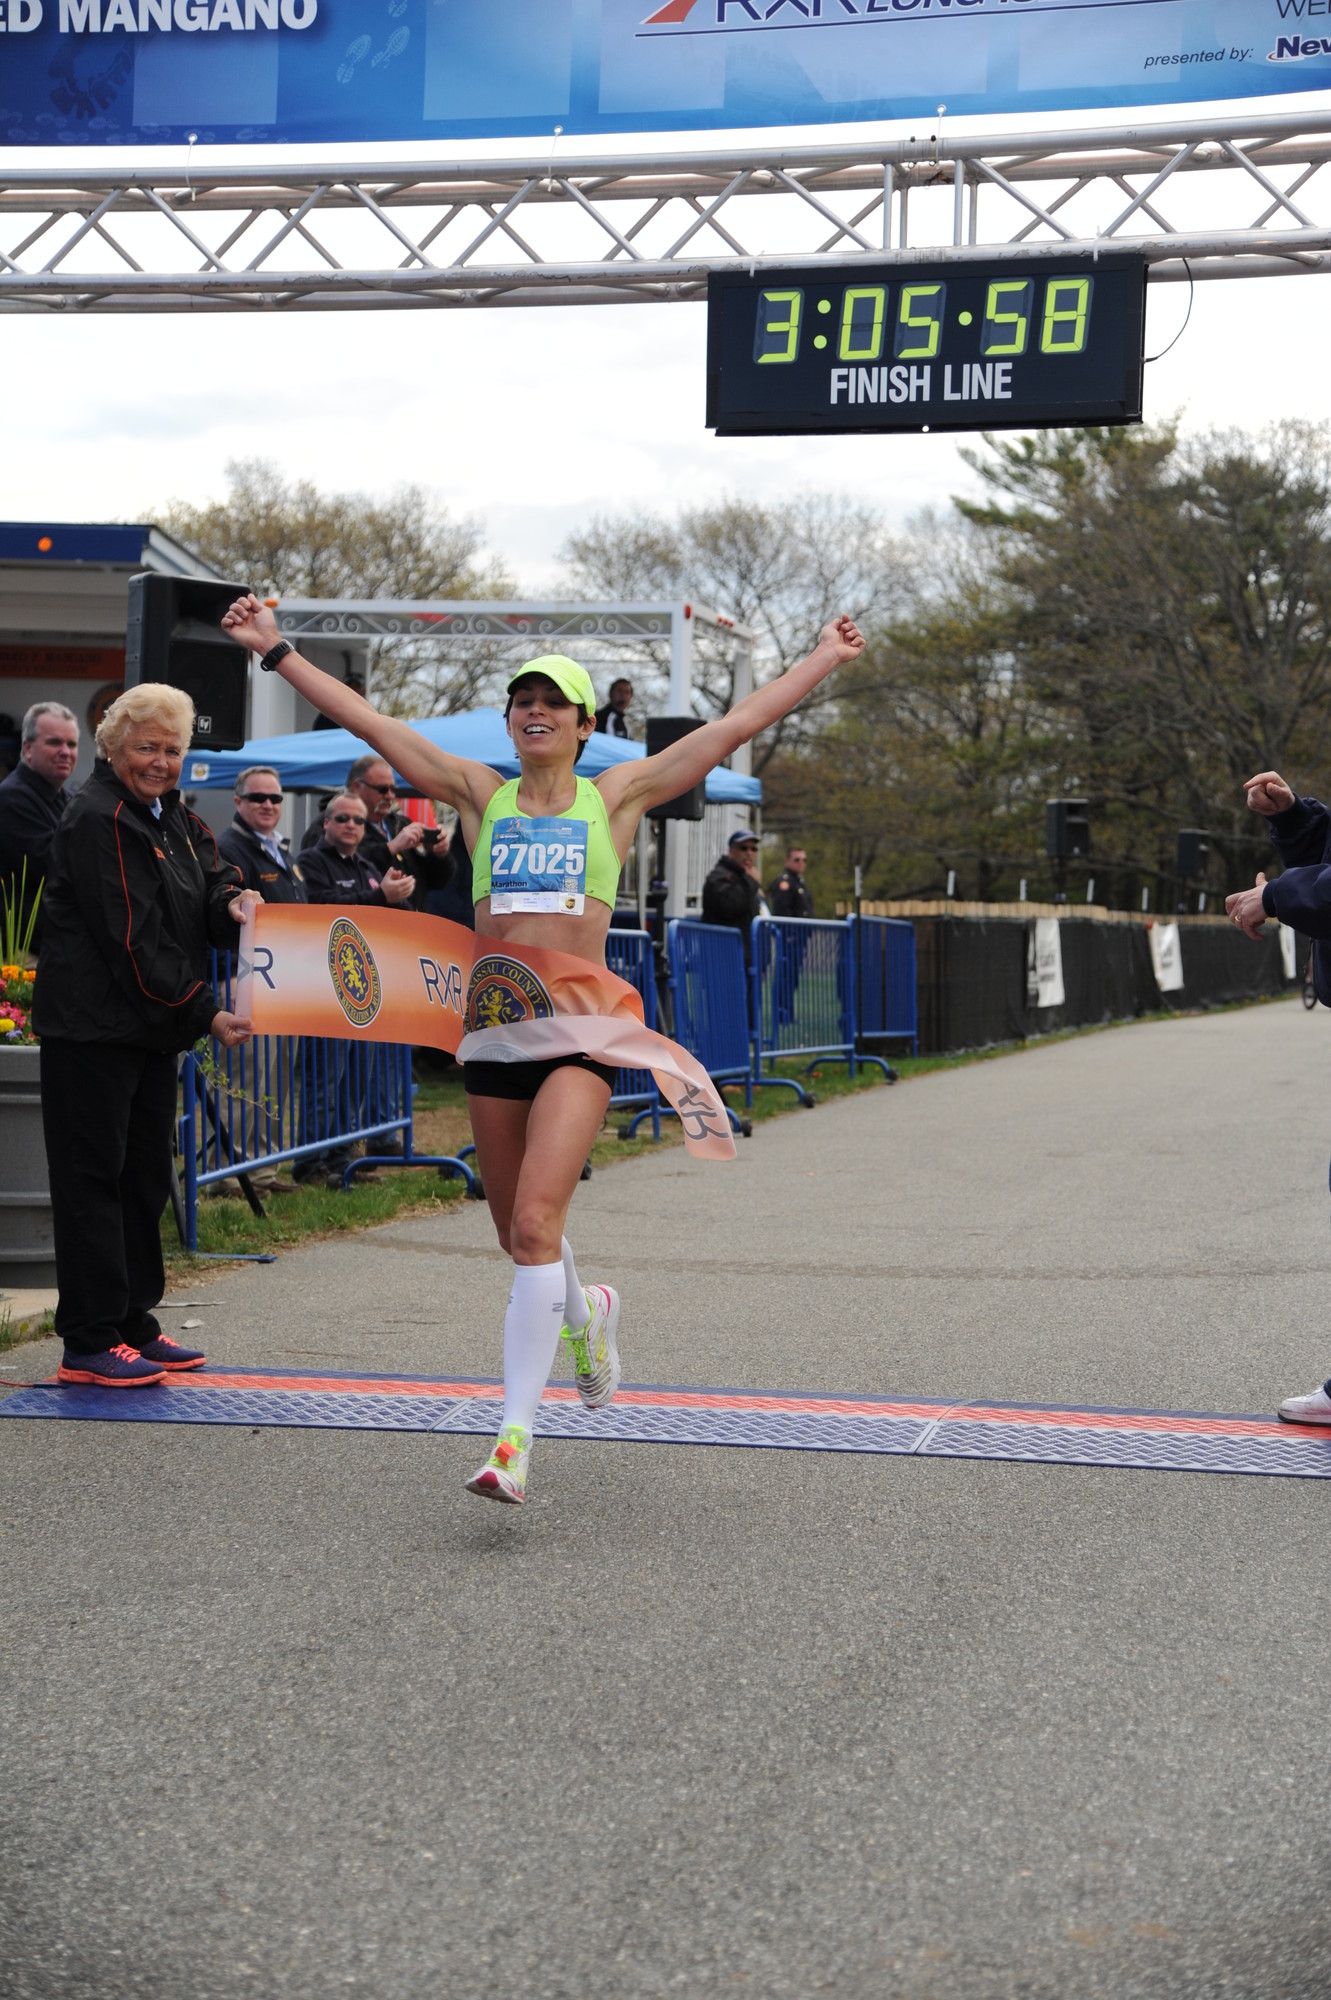 Tara Farrell, 35, of East Quoque, was the first female finisher of the 26.2-mile race.